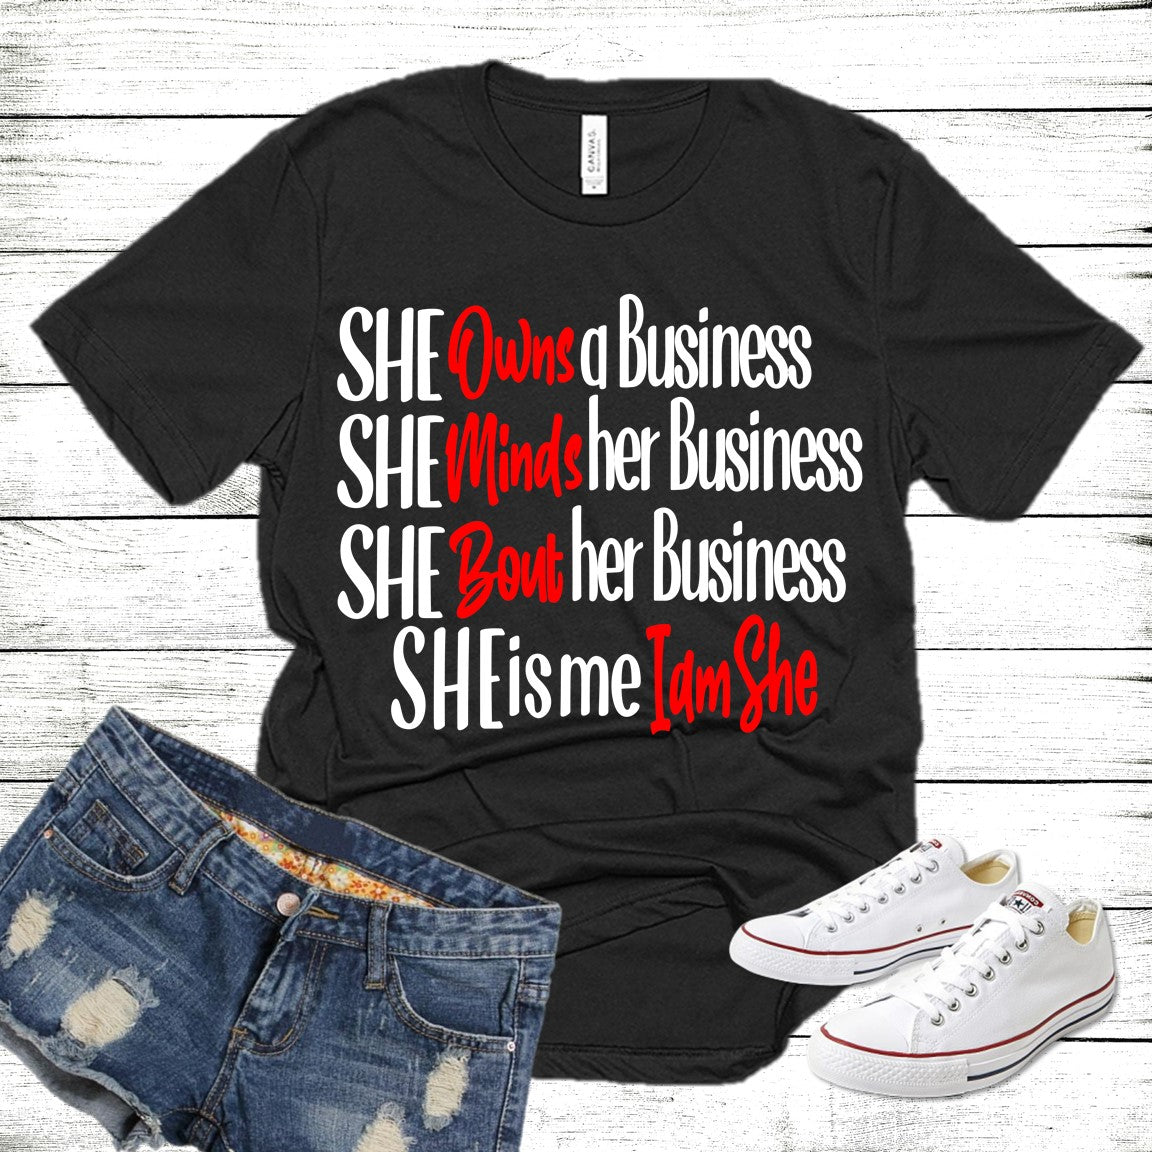 All in Your Business Tee shirt